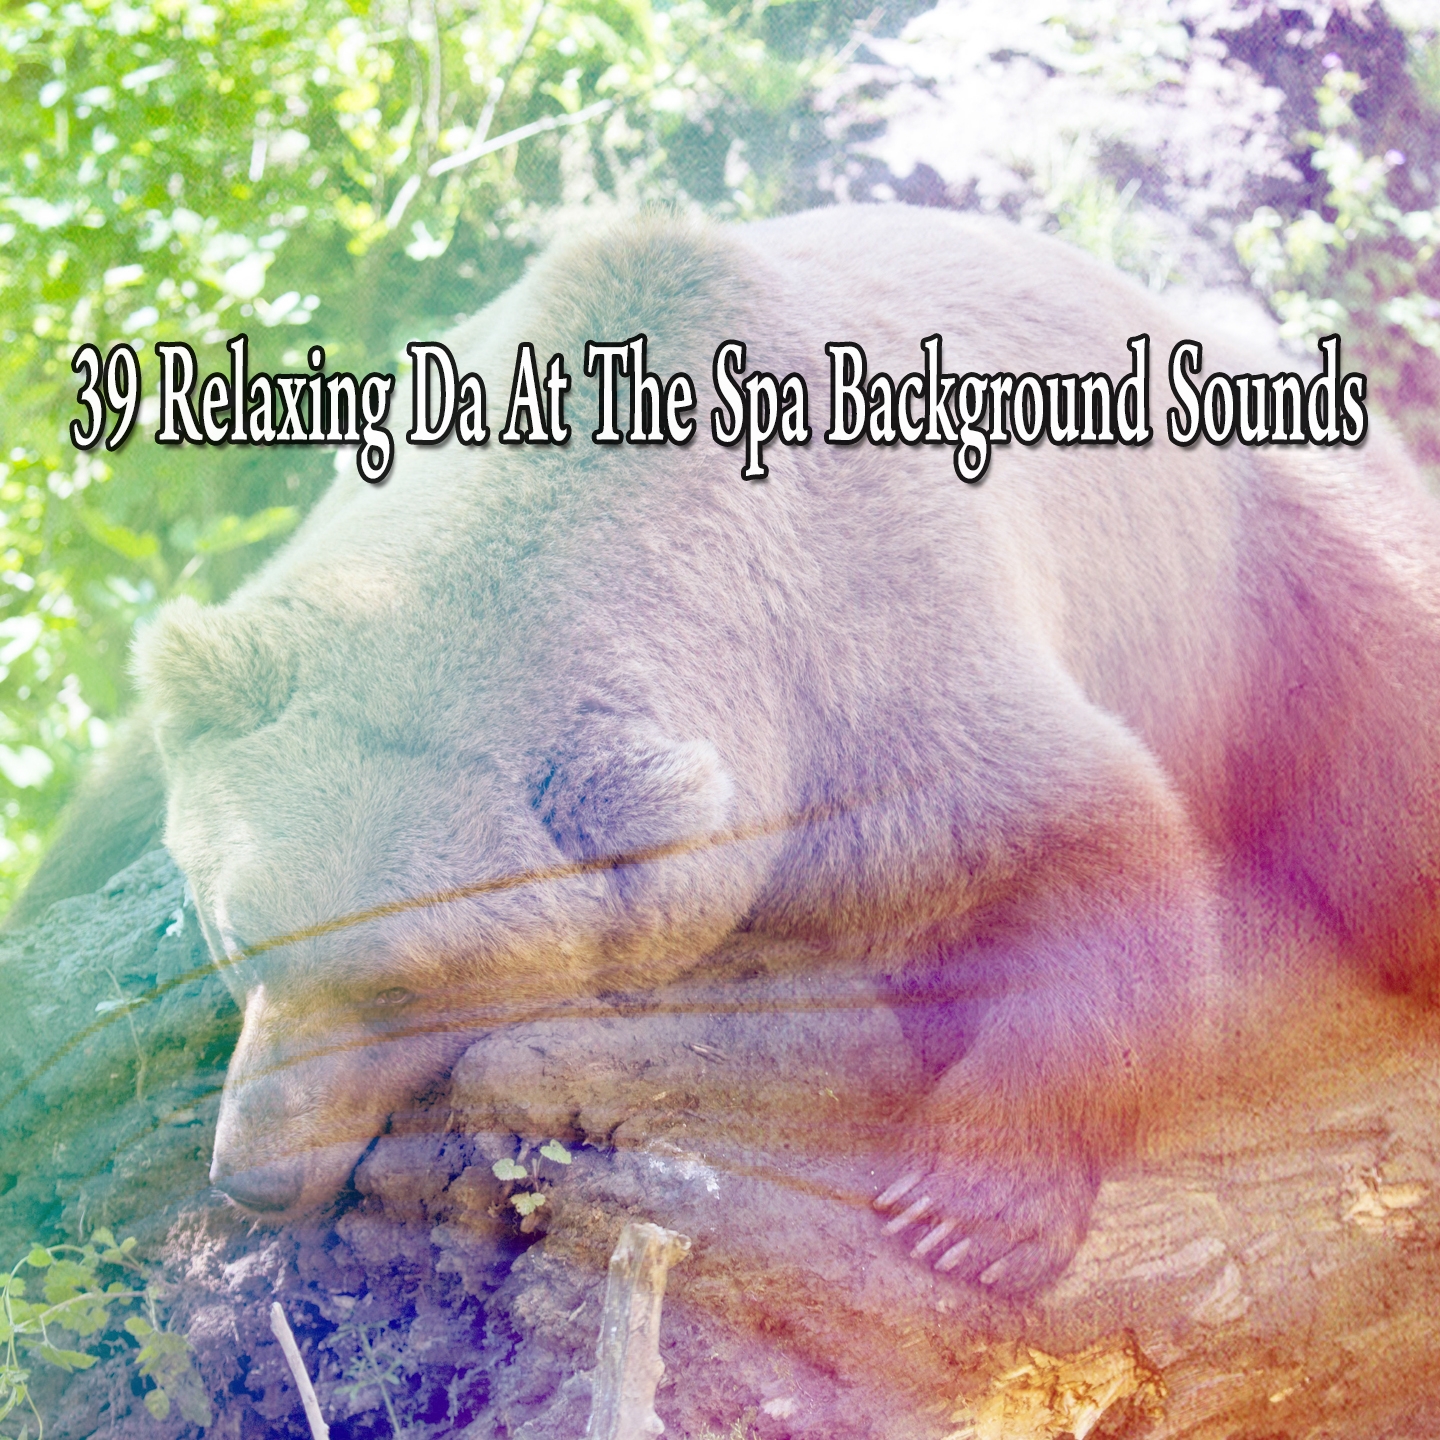 39 Relaxing Da At The Spa Background Sounds